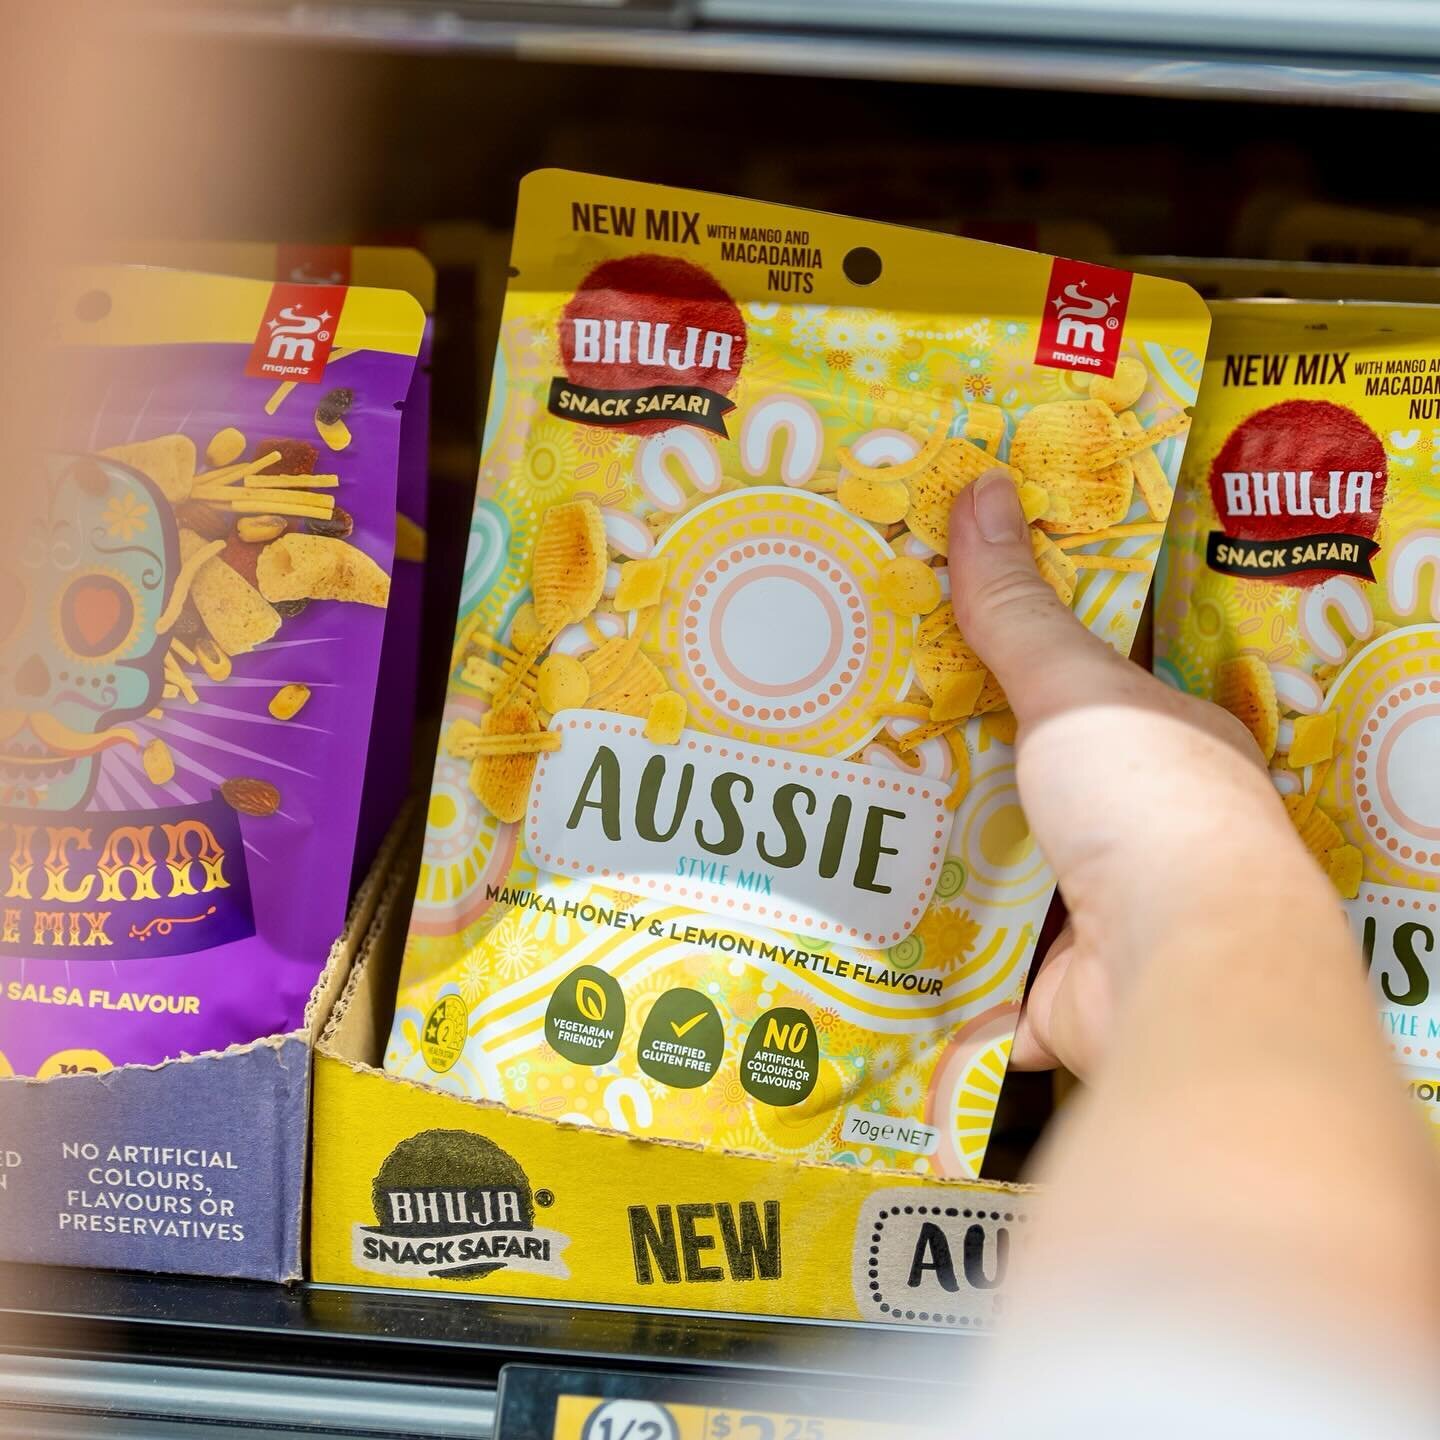 Have you spotted these new snacks from @bhujasnacks in Woolworths? 👀

We have been working with them to spread the word about these delightful new snacks! Here are some content we have made so far ✨
 
Give @bhujasnacks a follow to see more new and e